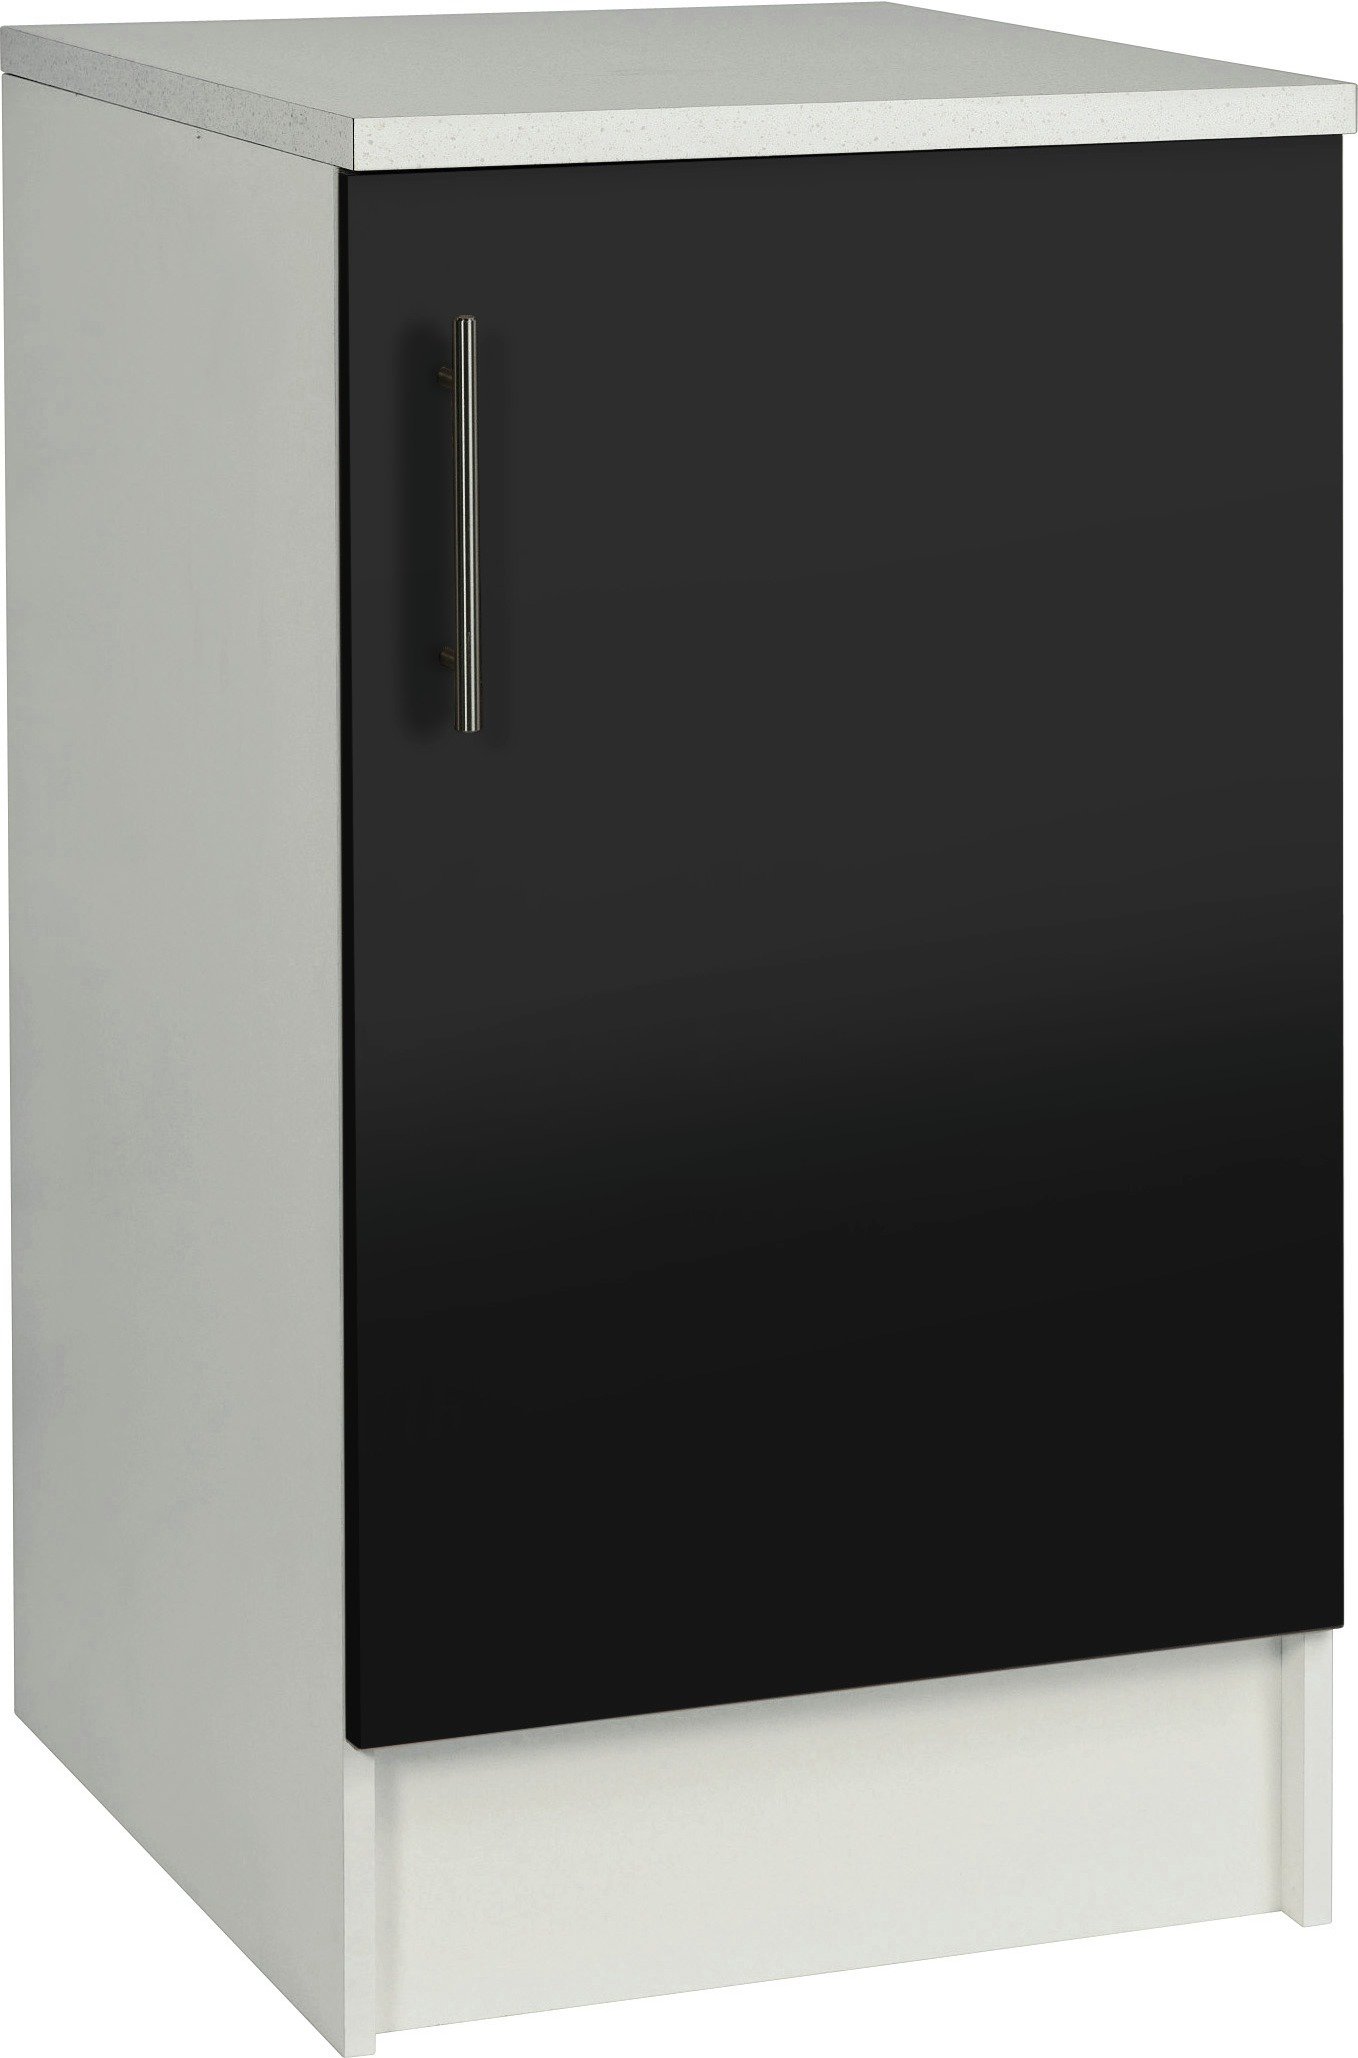 Argos Home Athina 500mm Fitted Kitchen Base Unit - Black